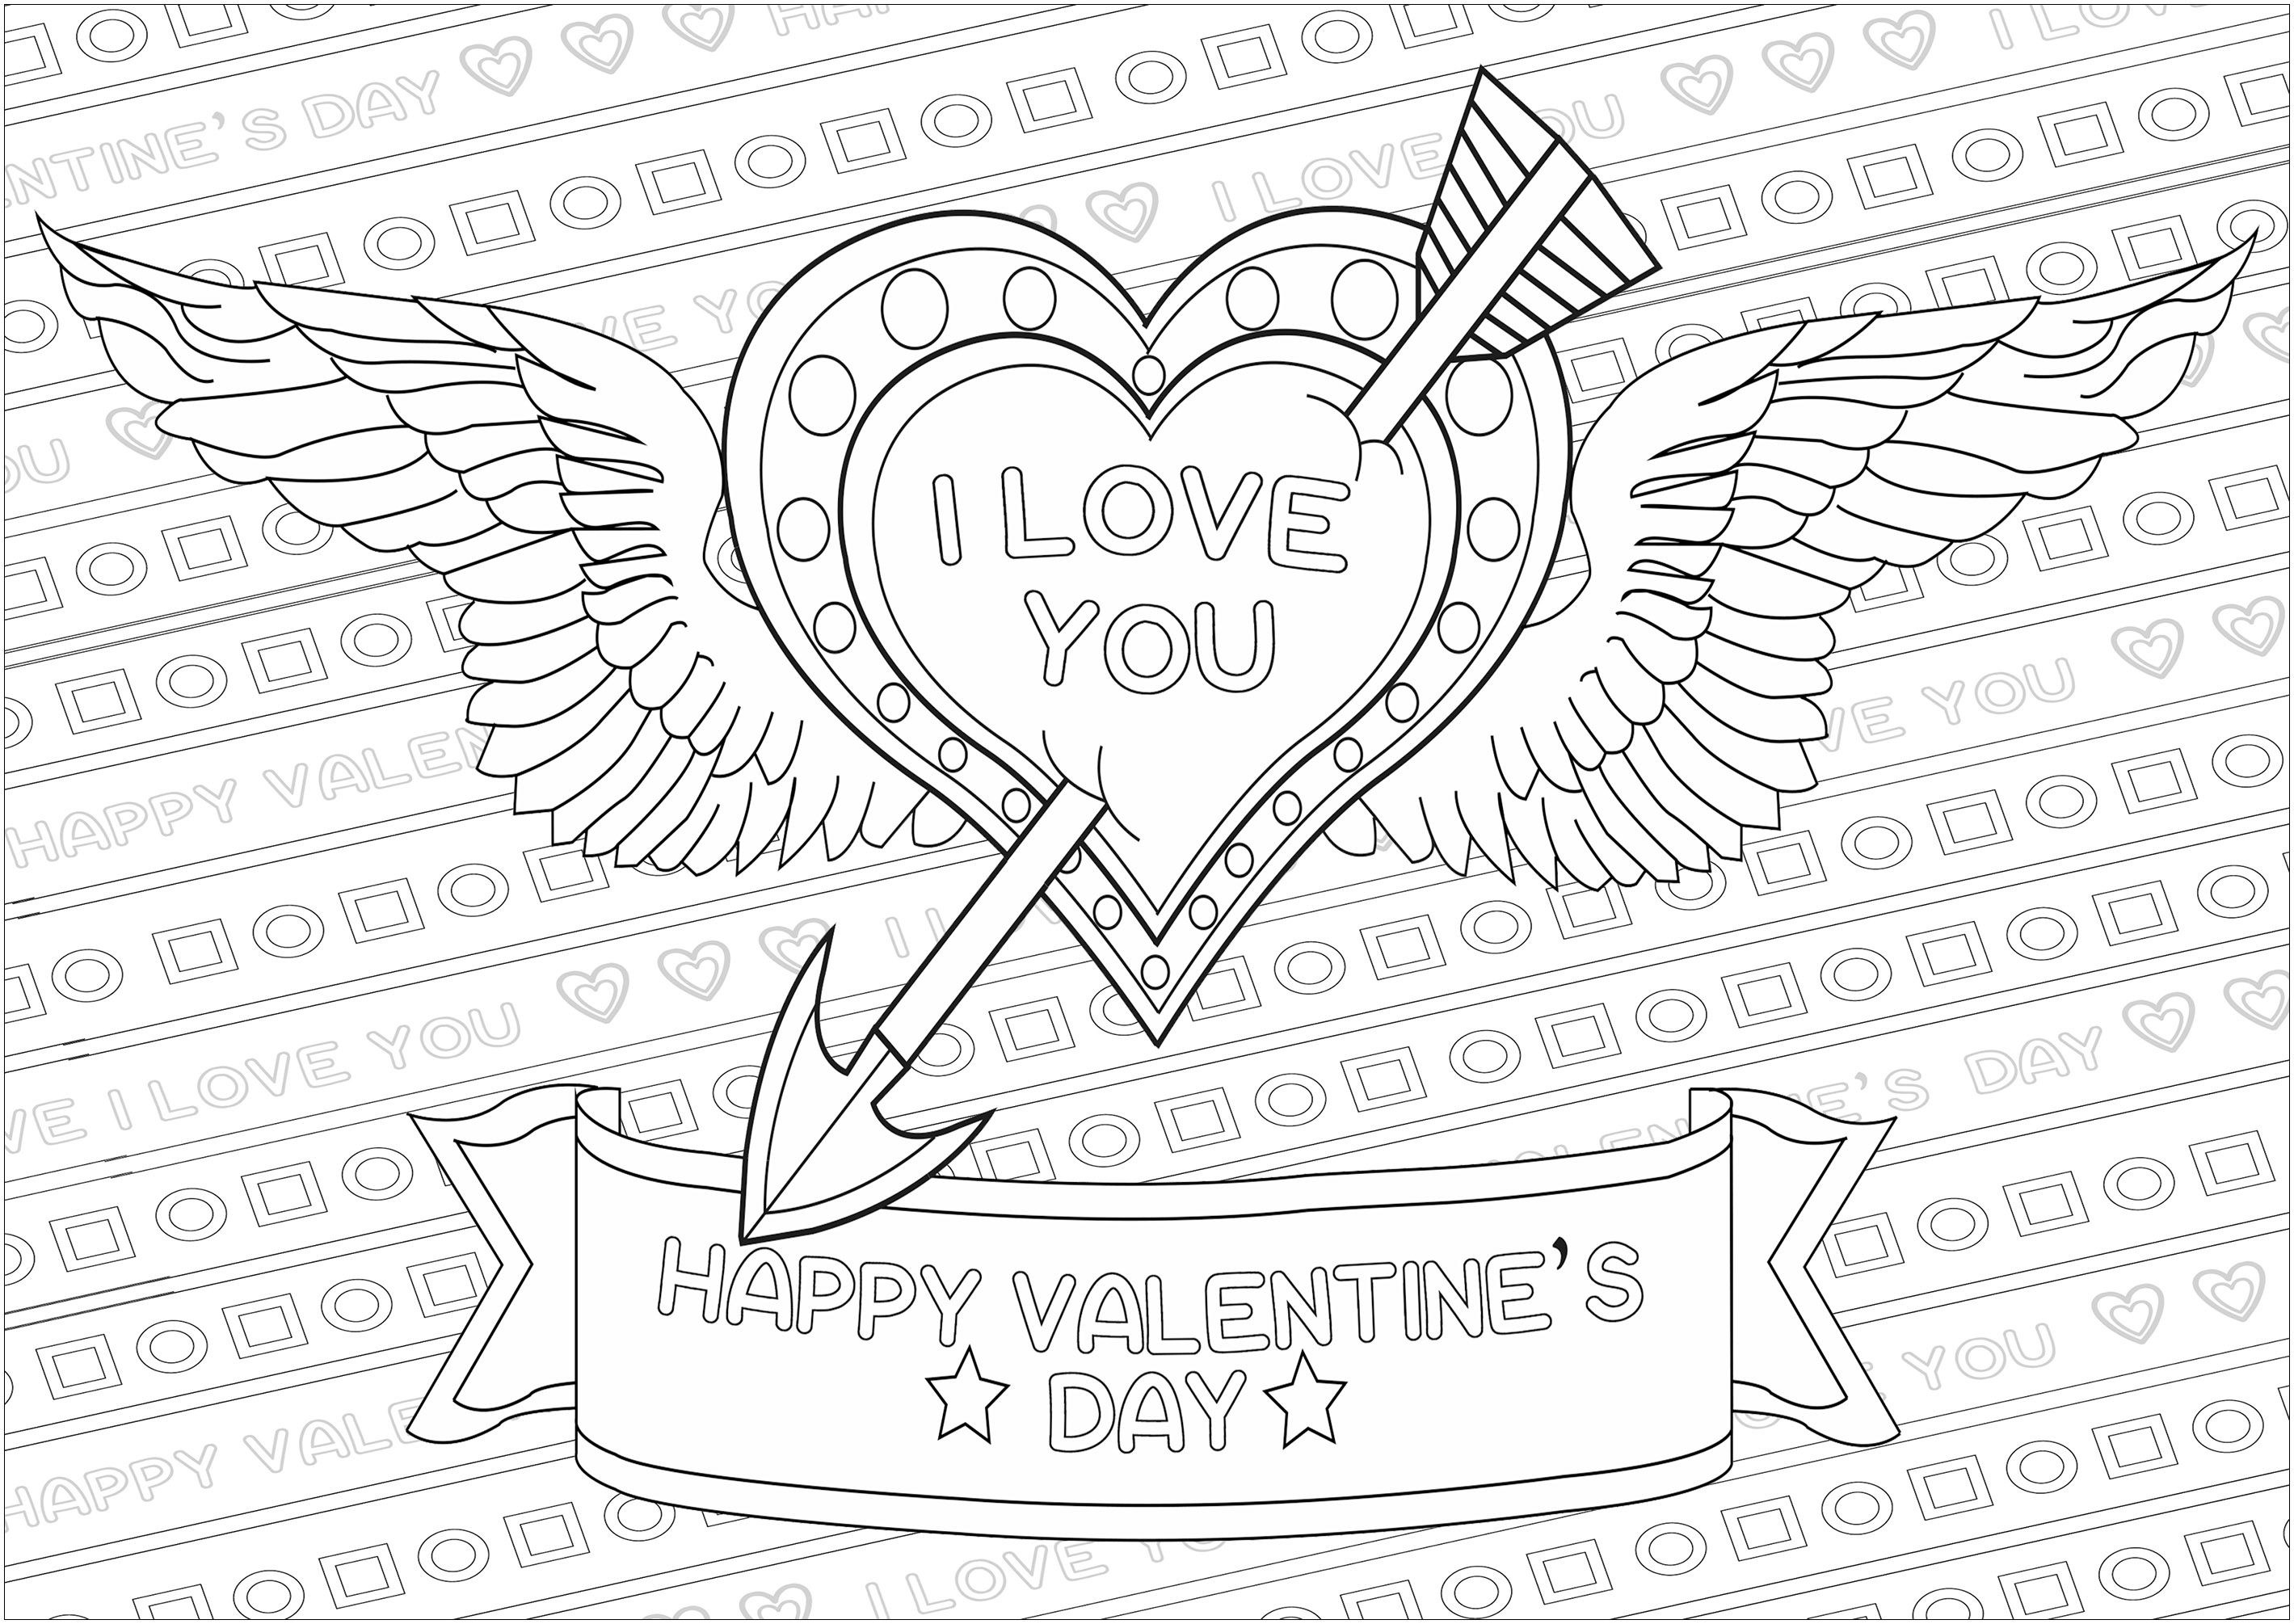 Color this lovely Valentine's Day Heart with wings